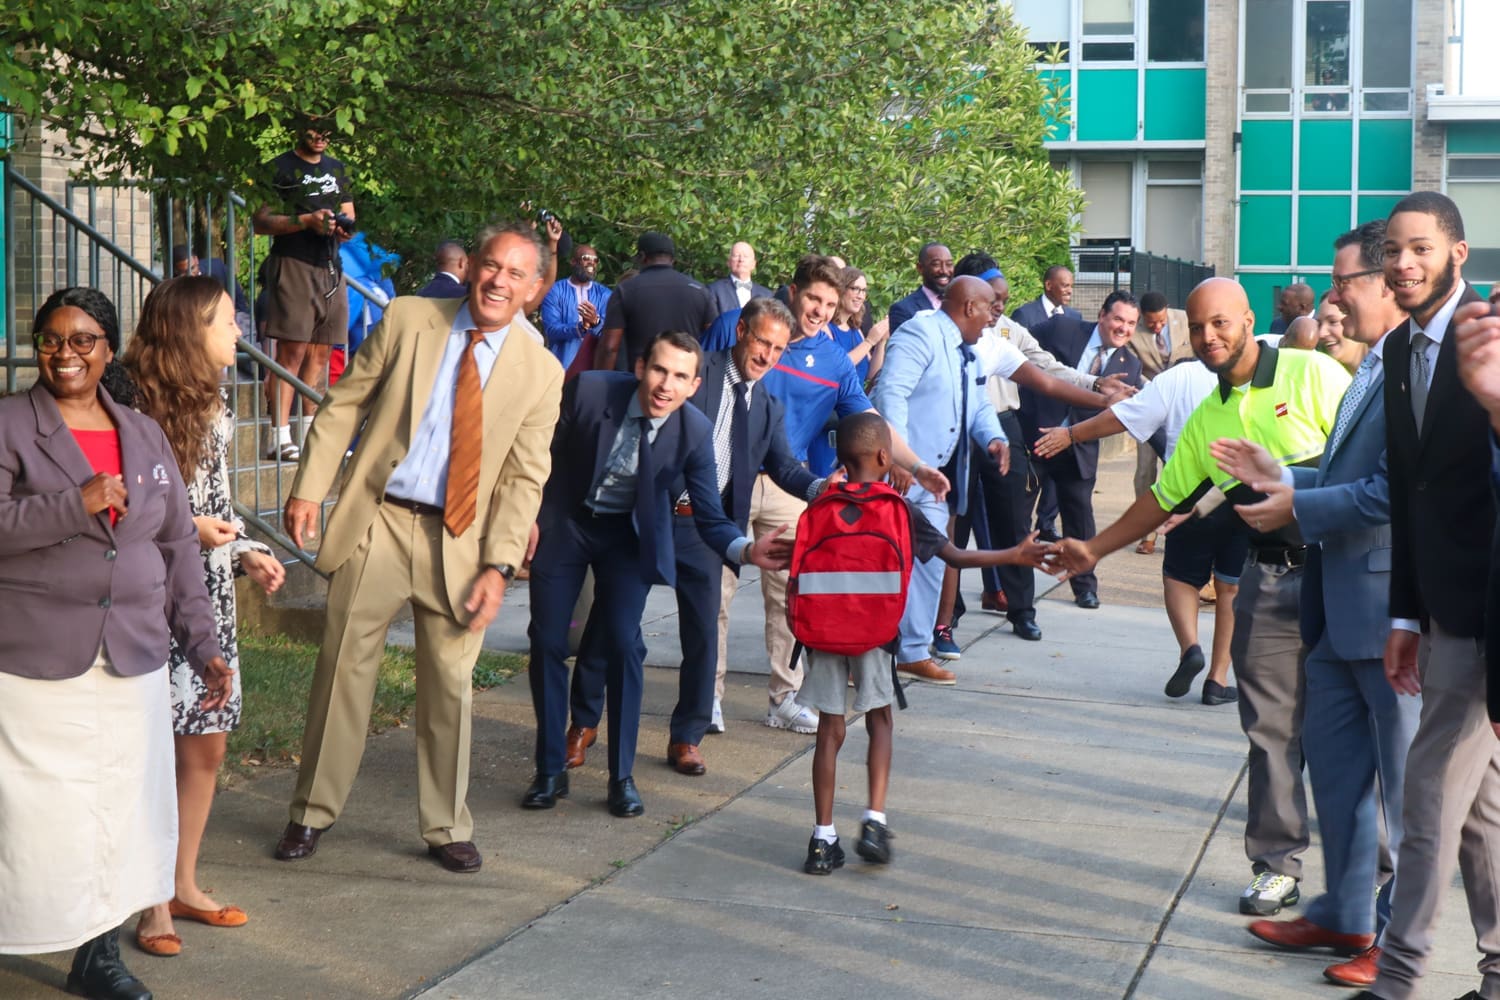 Featured image for “Students treated like celebs at EastSide’s first day ”